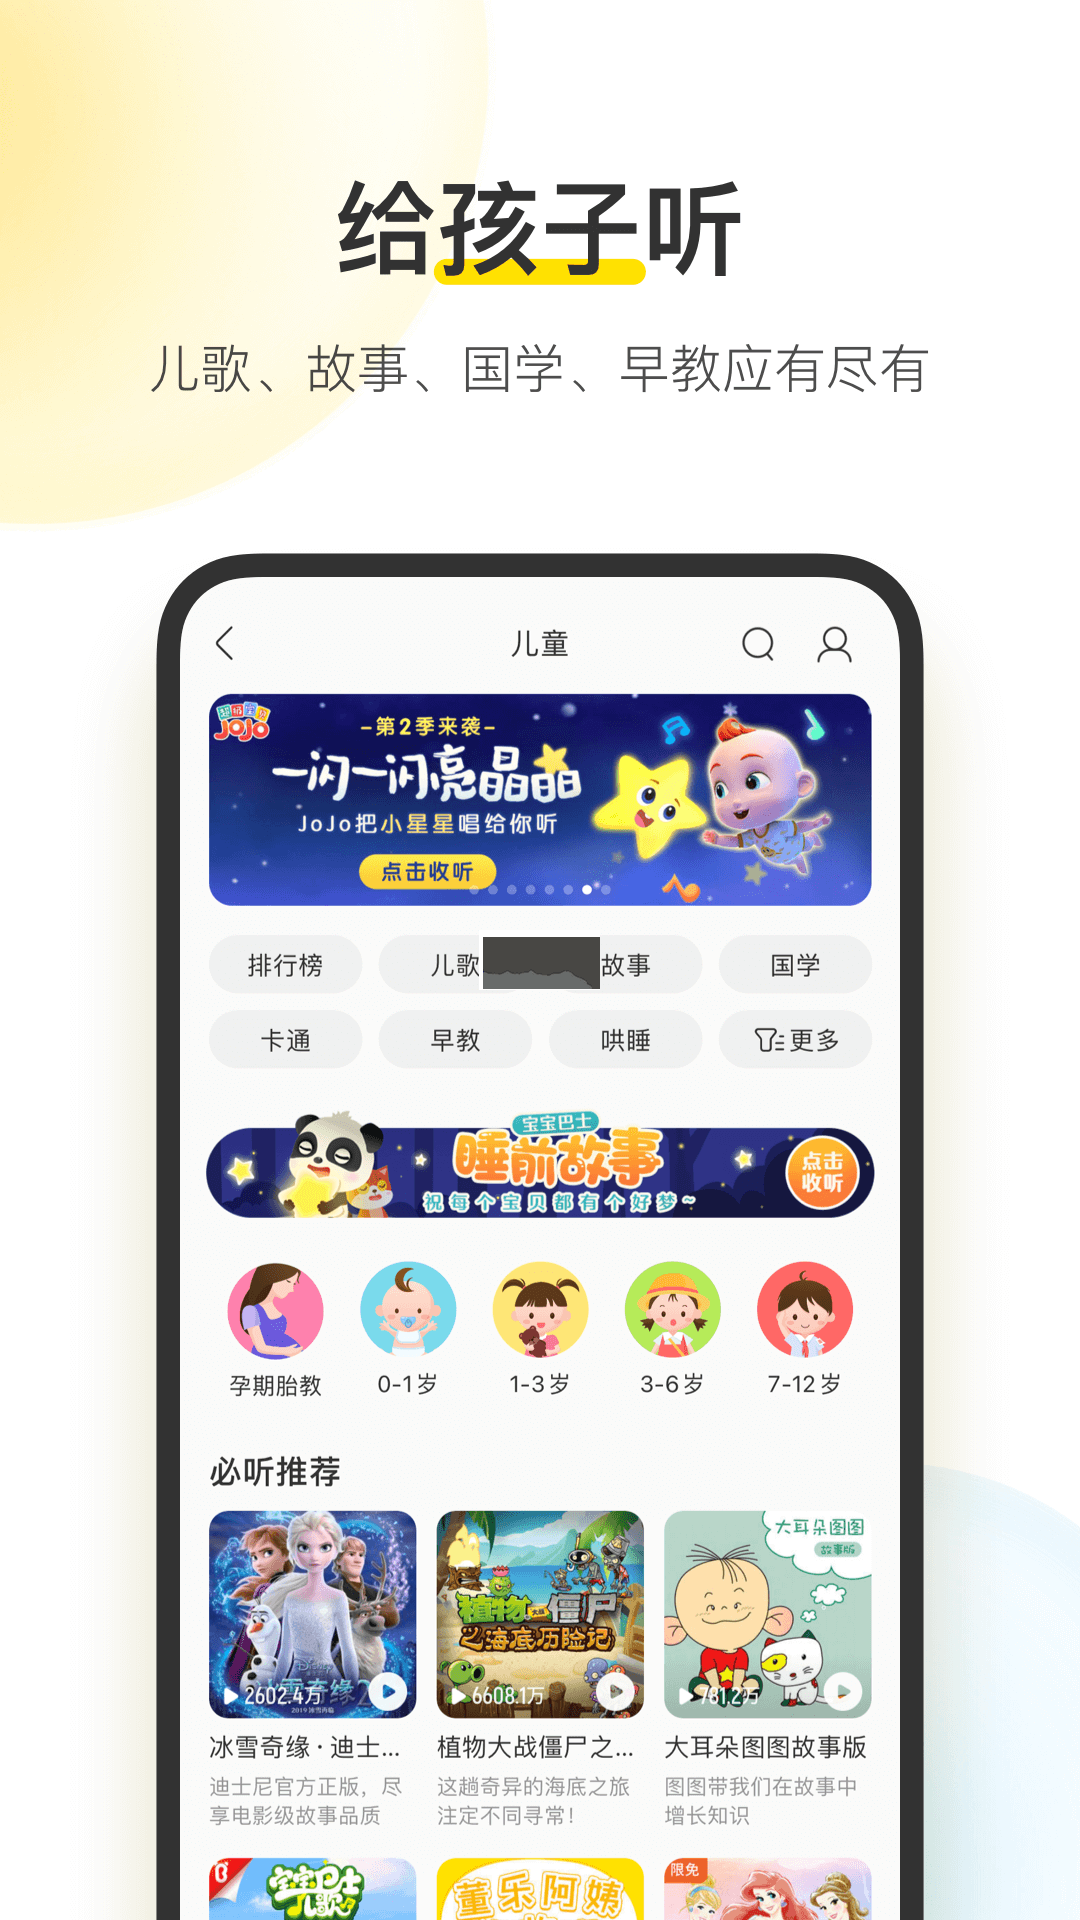  The latest free version of Kuwo music app on the official website